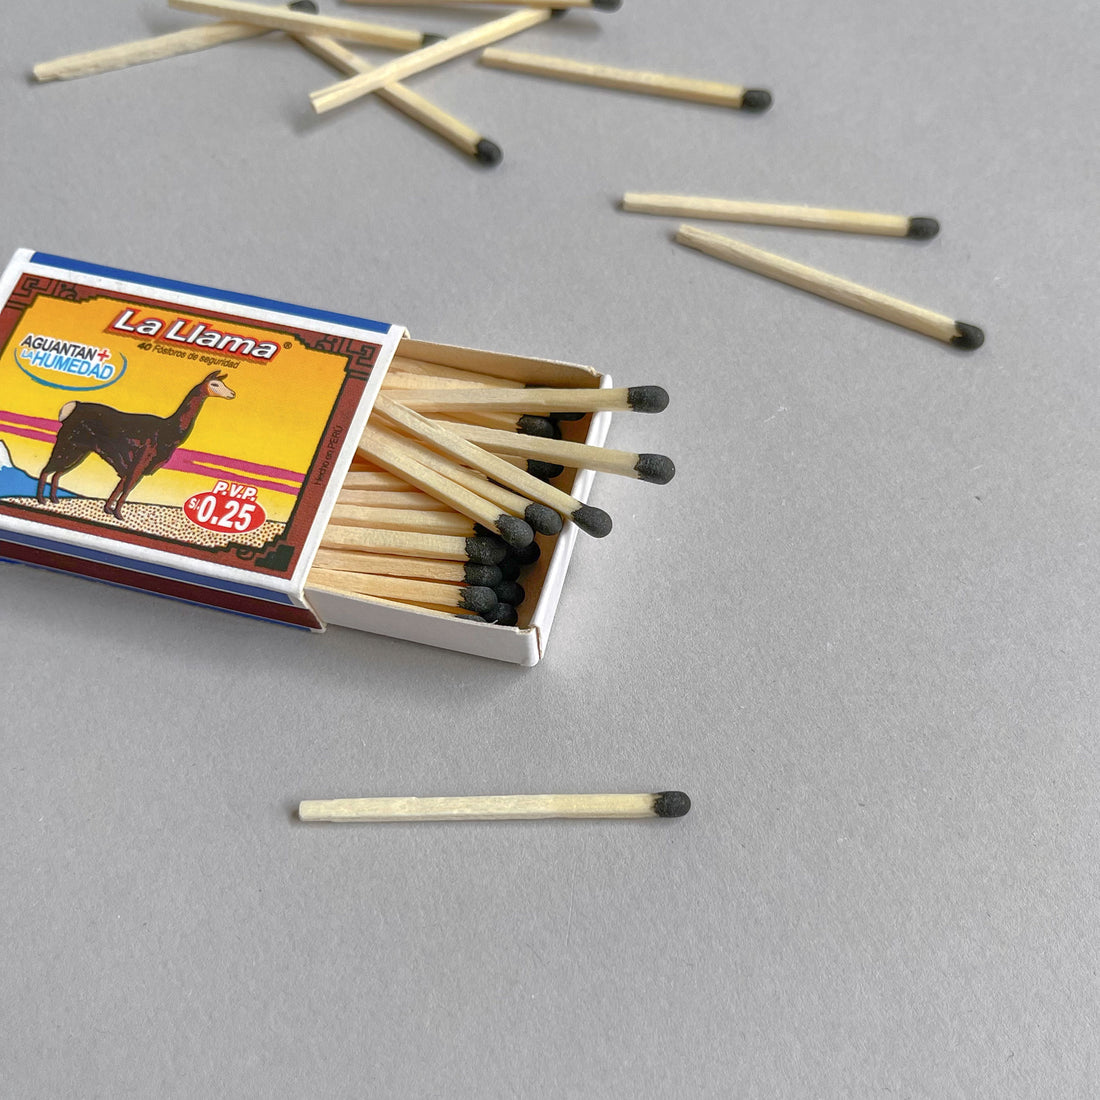 How Are Matches Made? The Materials Used in Making Boxed Matches